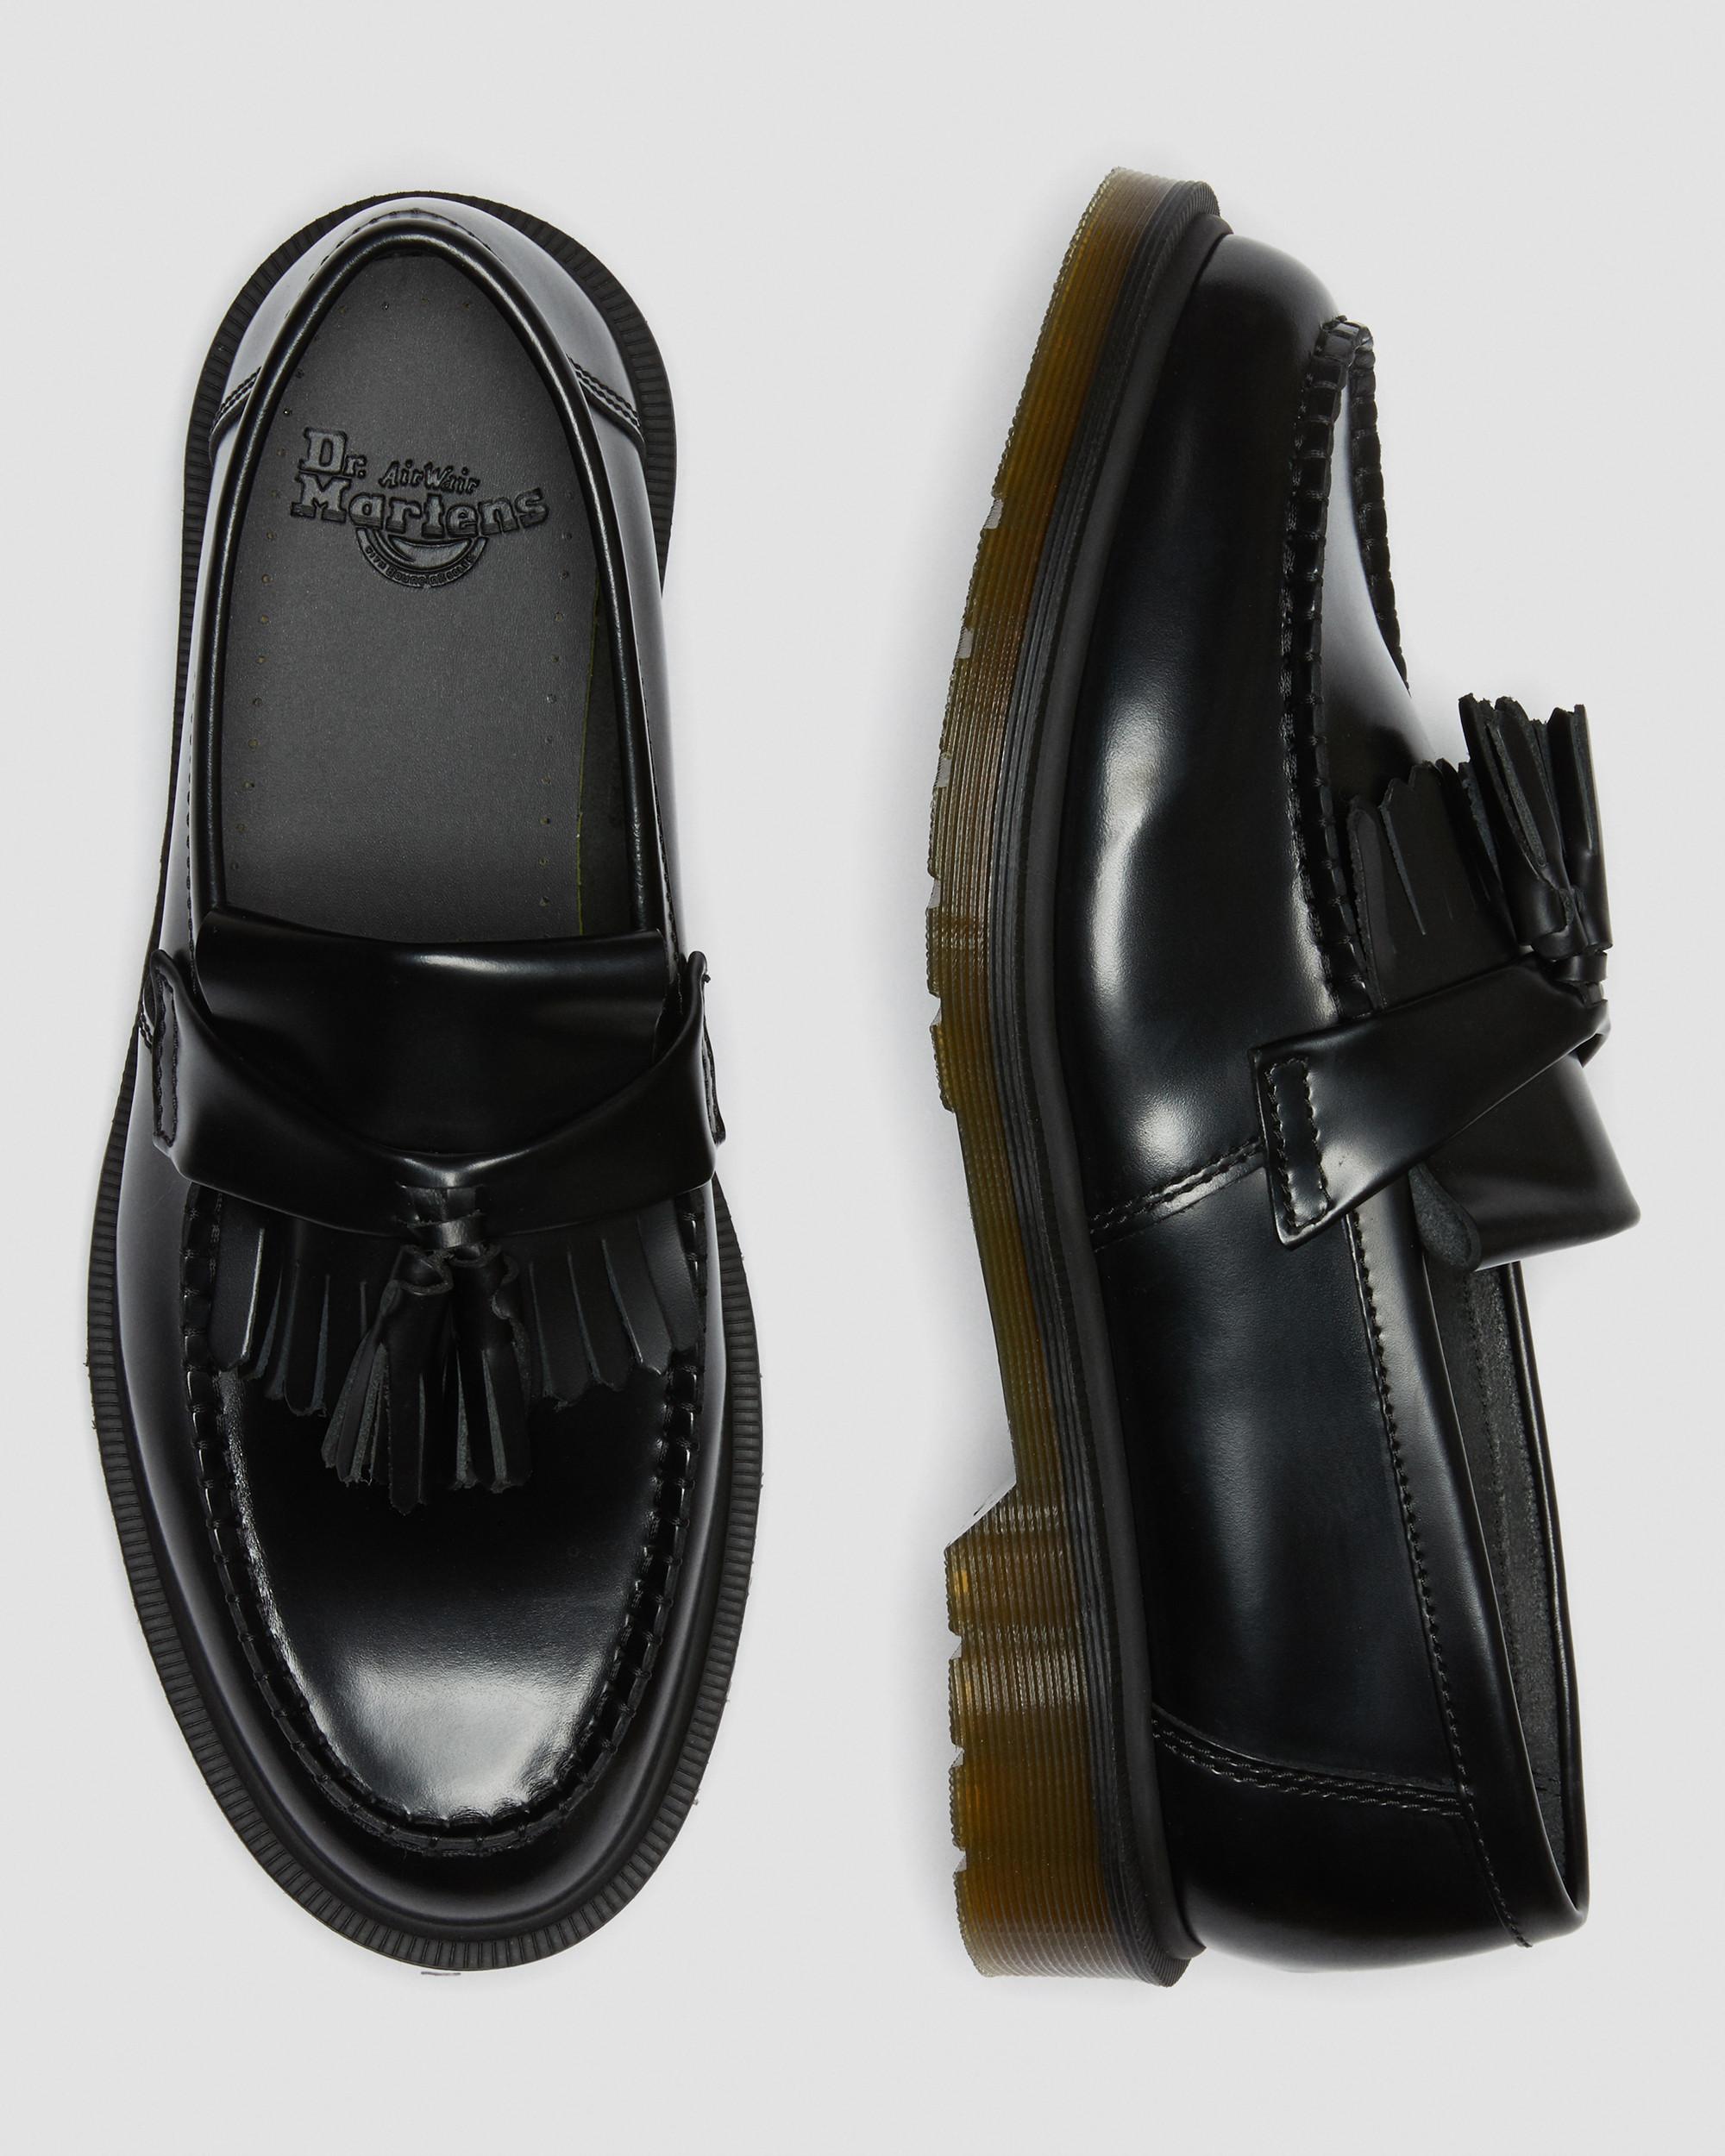 Adrian Smooth Leather Tassel Loafers, Black | Dr. Martens